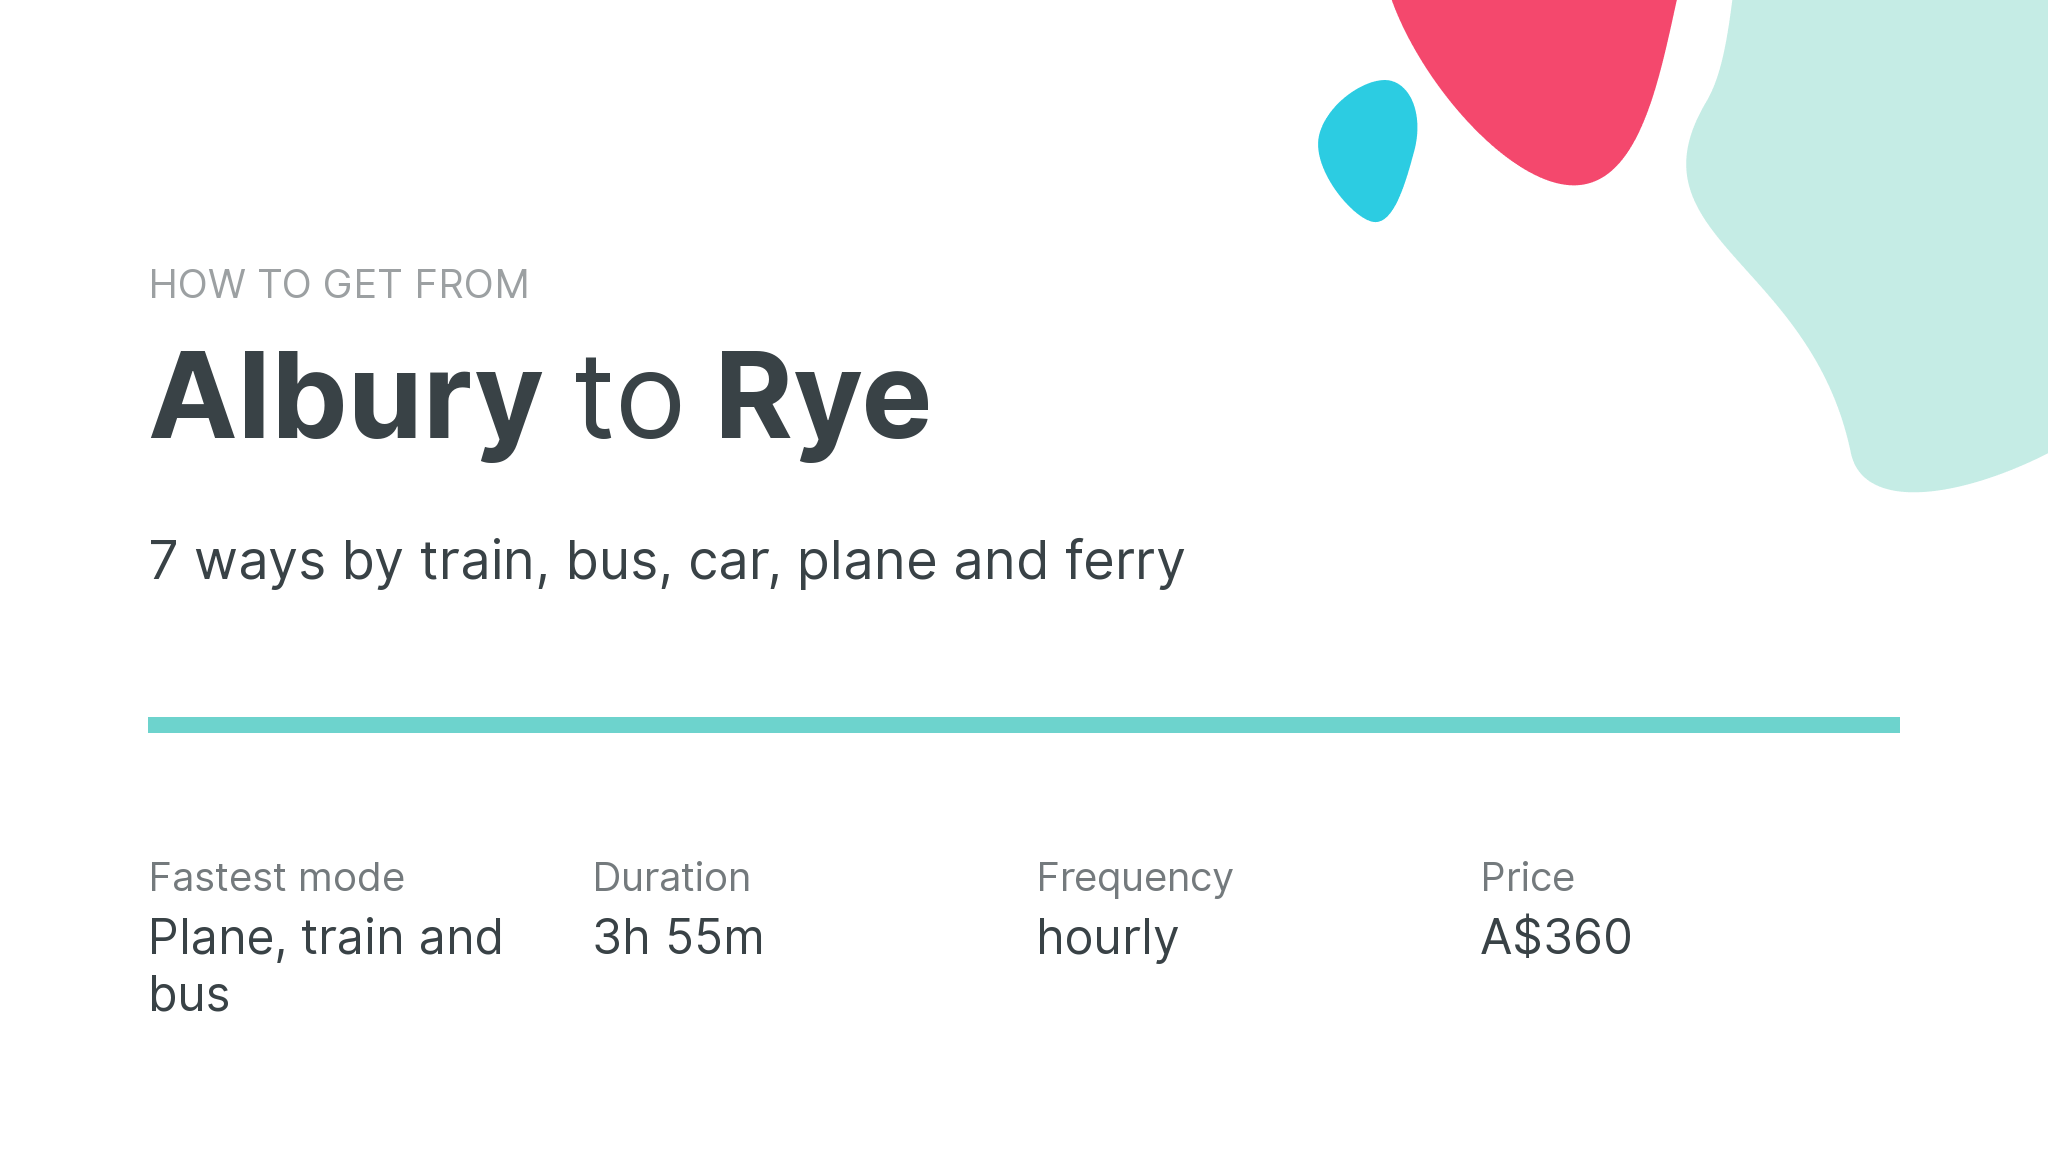 How do I get from Albury to Rye